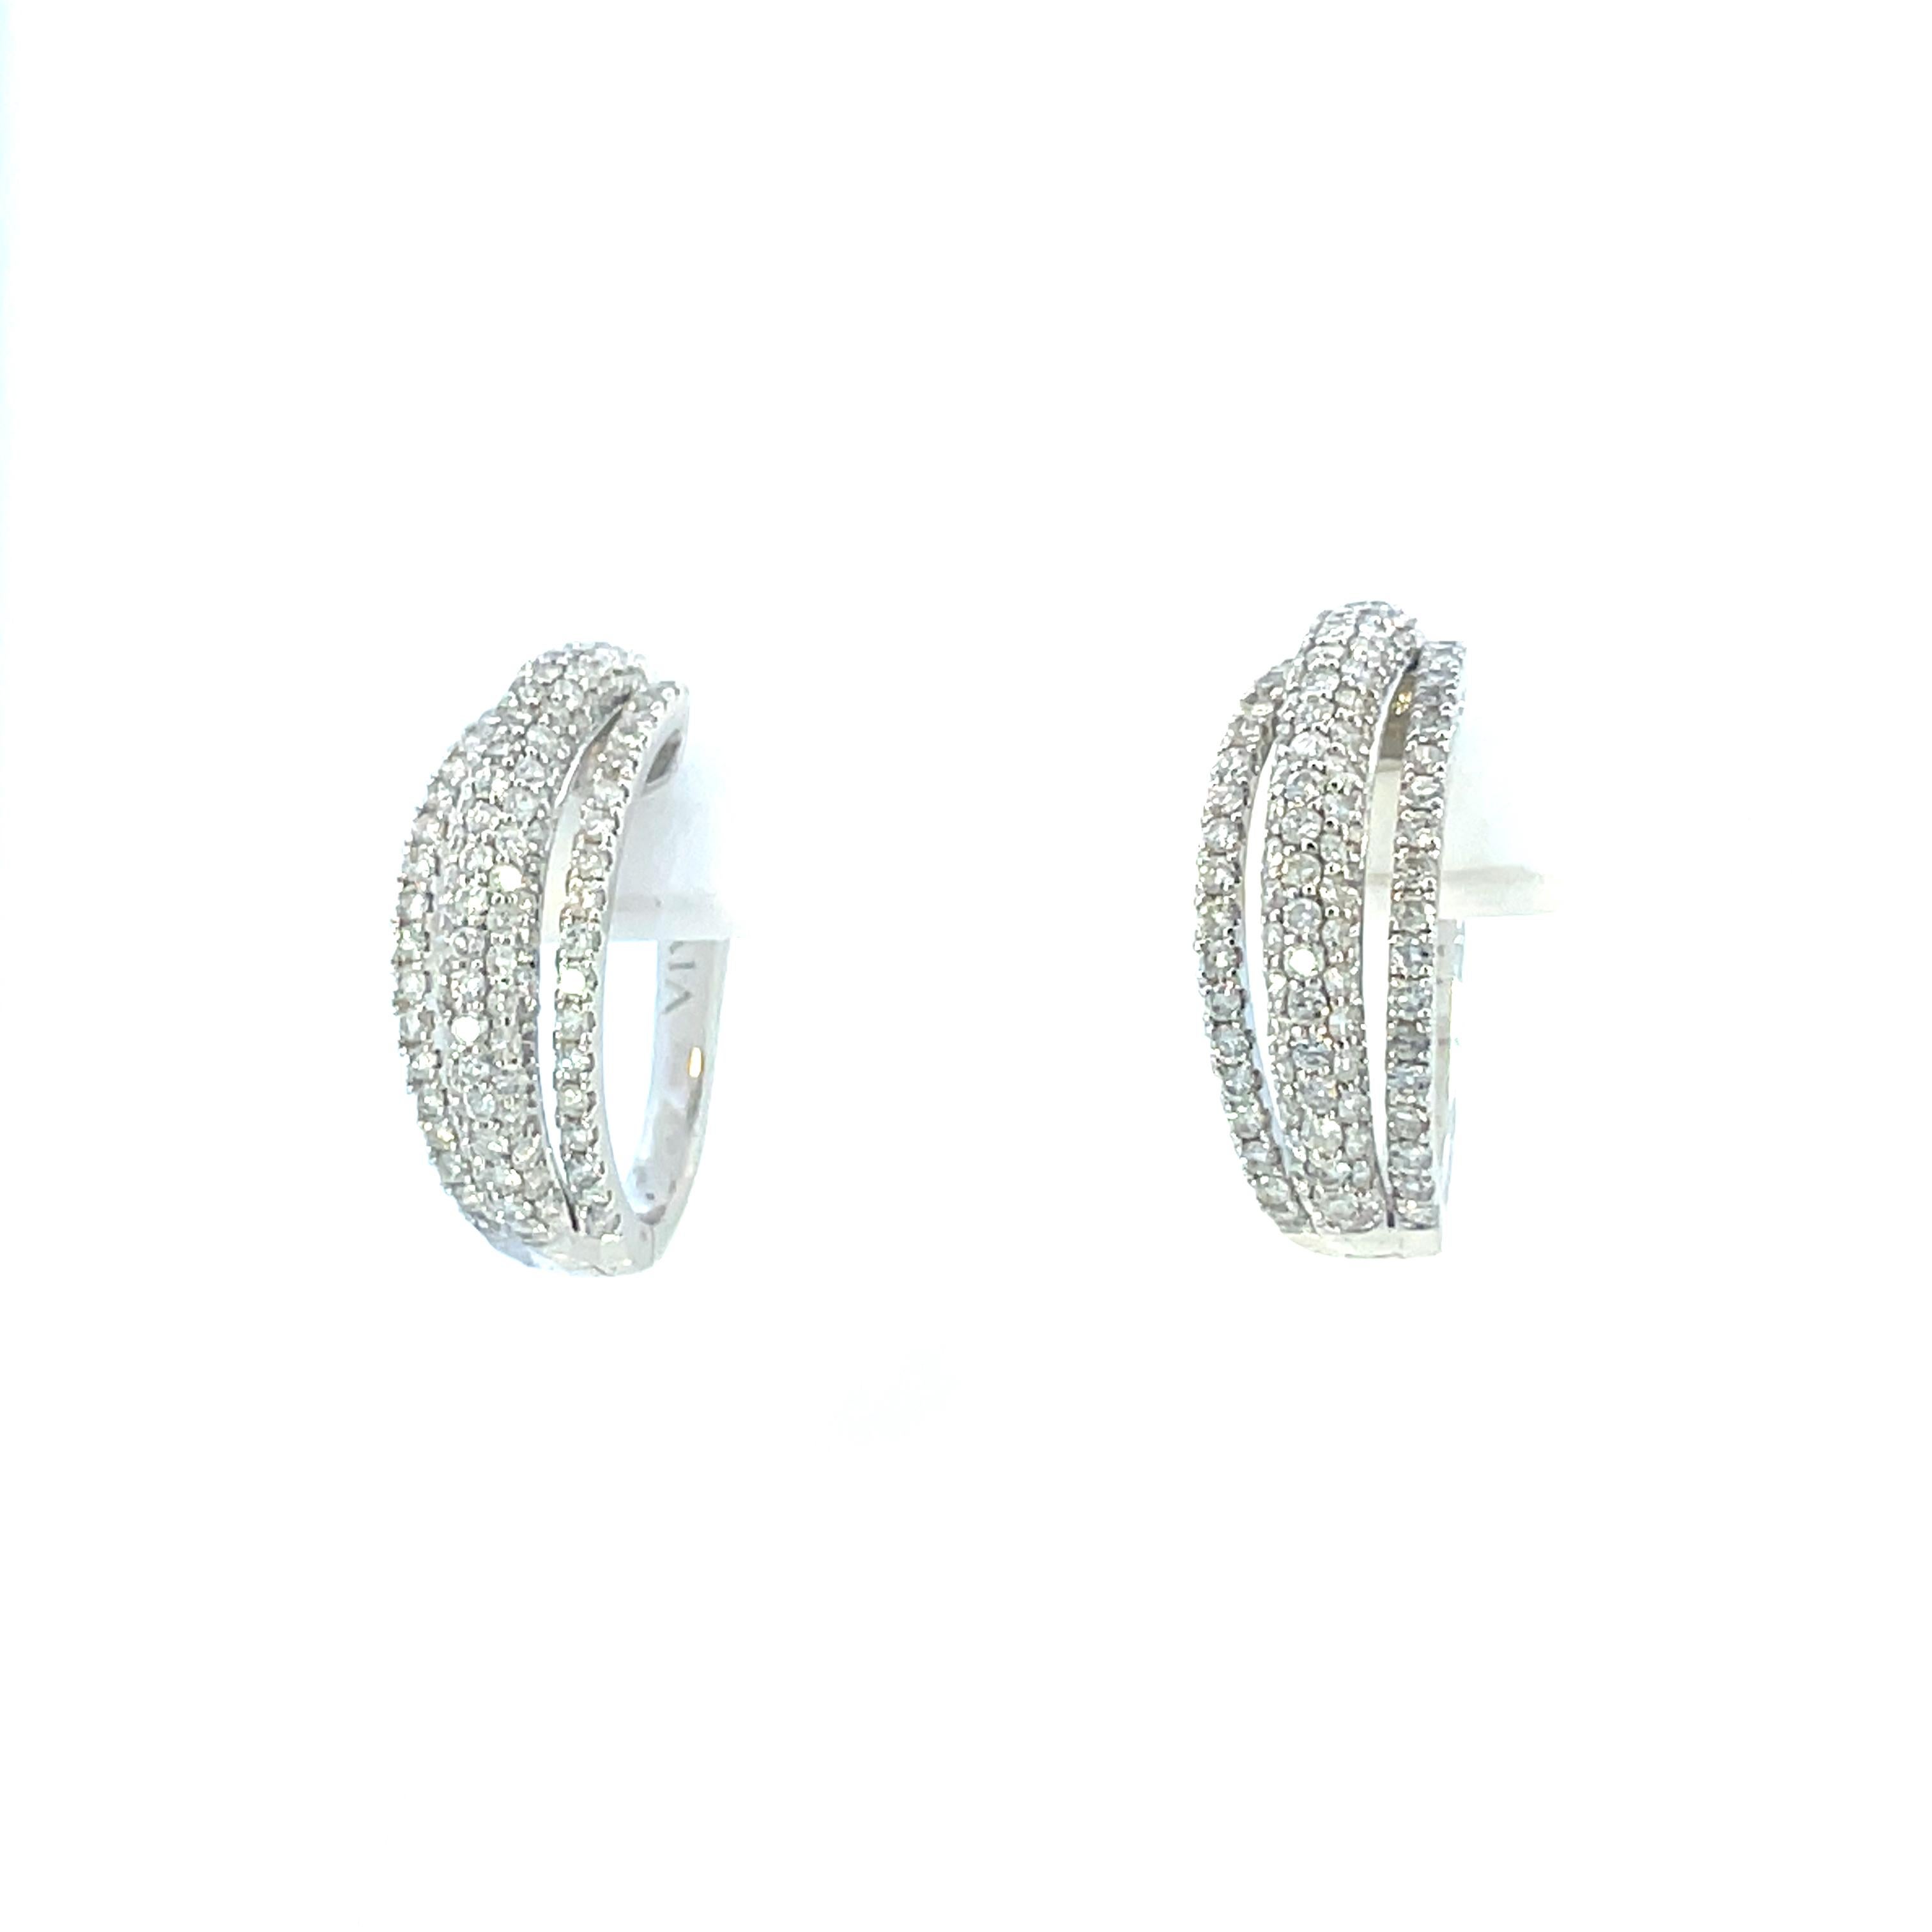 Contemporary 18K White Gold Three Row Pave Dangle Hoop Earrings  In Excellent Condition For Sale In Lexington, KY